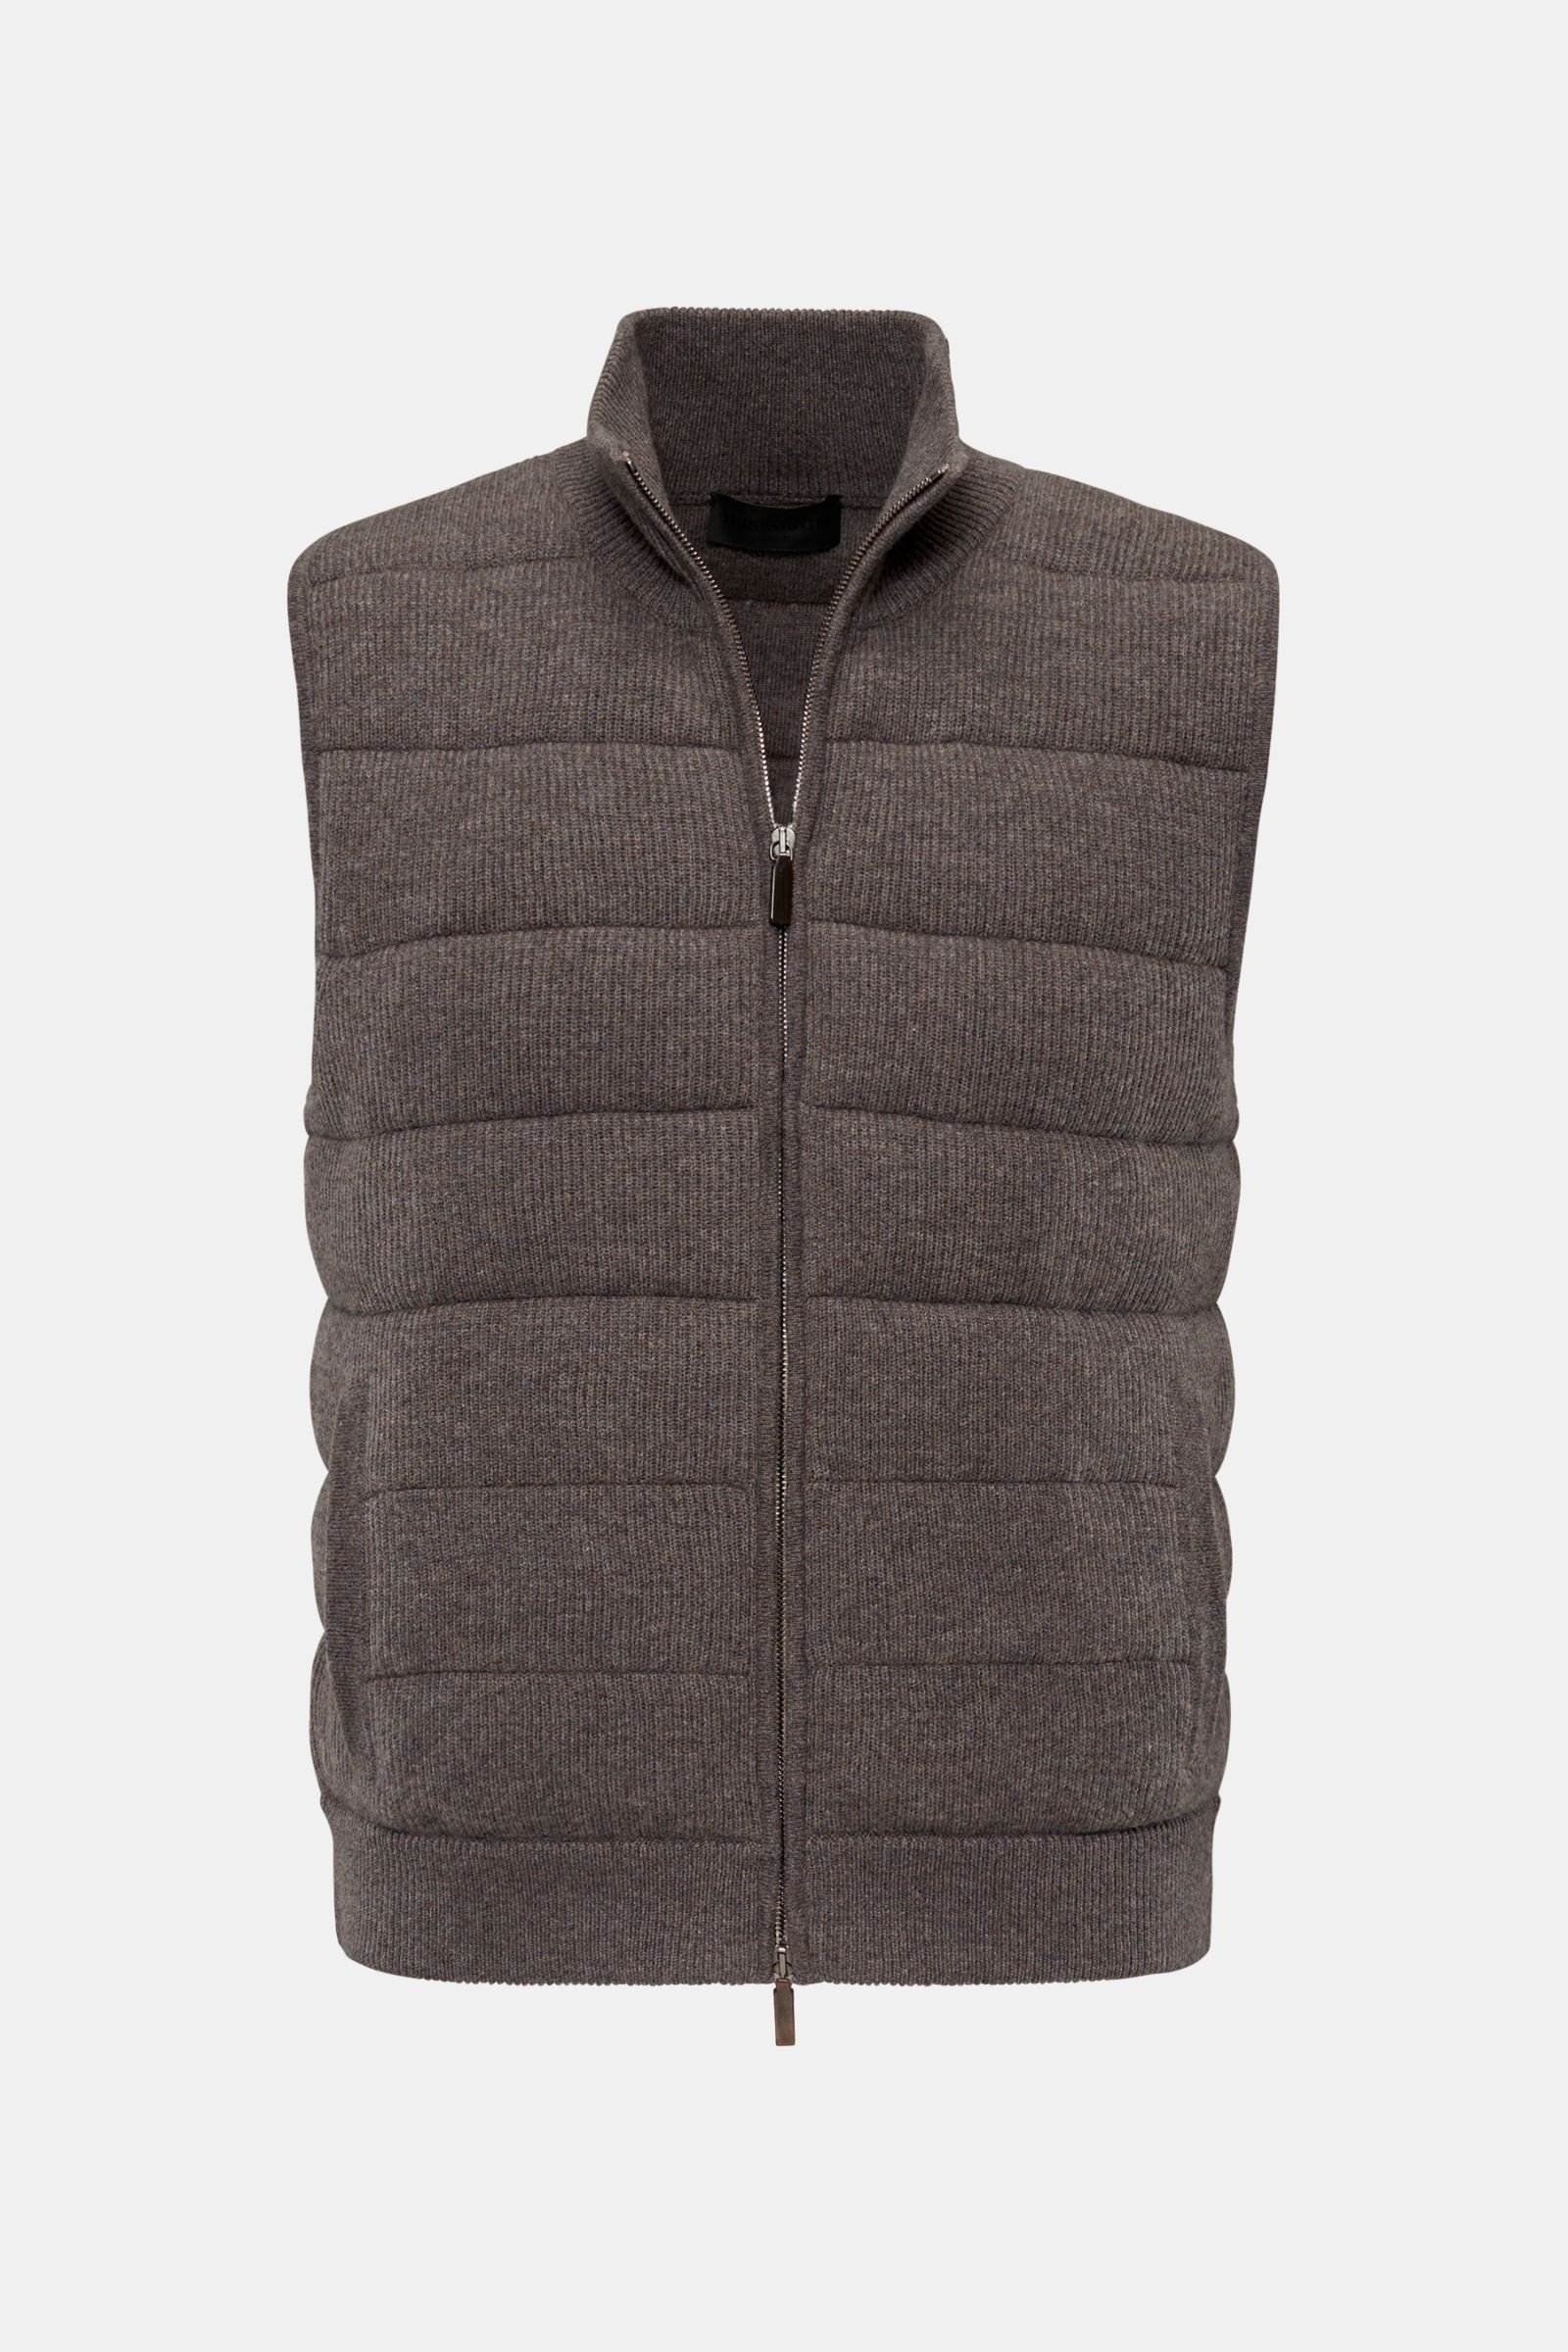 Cashmere knitted waistcoat 'Mailo' grey-brown